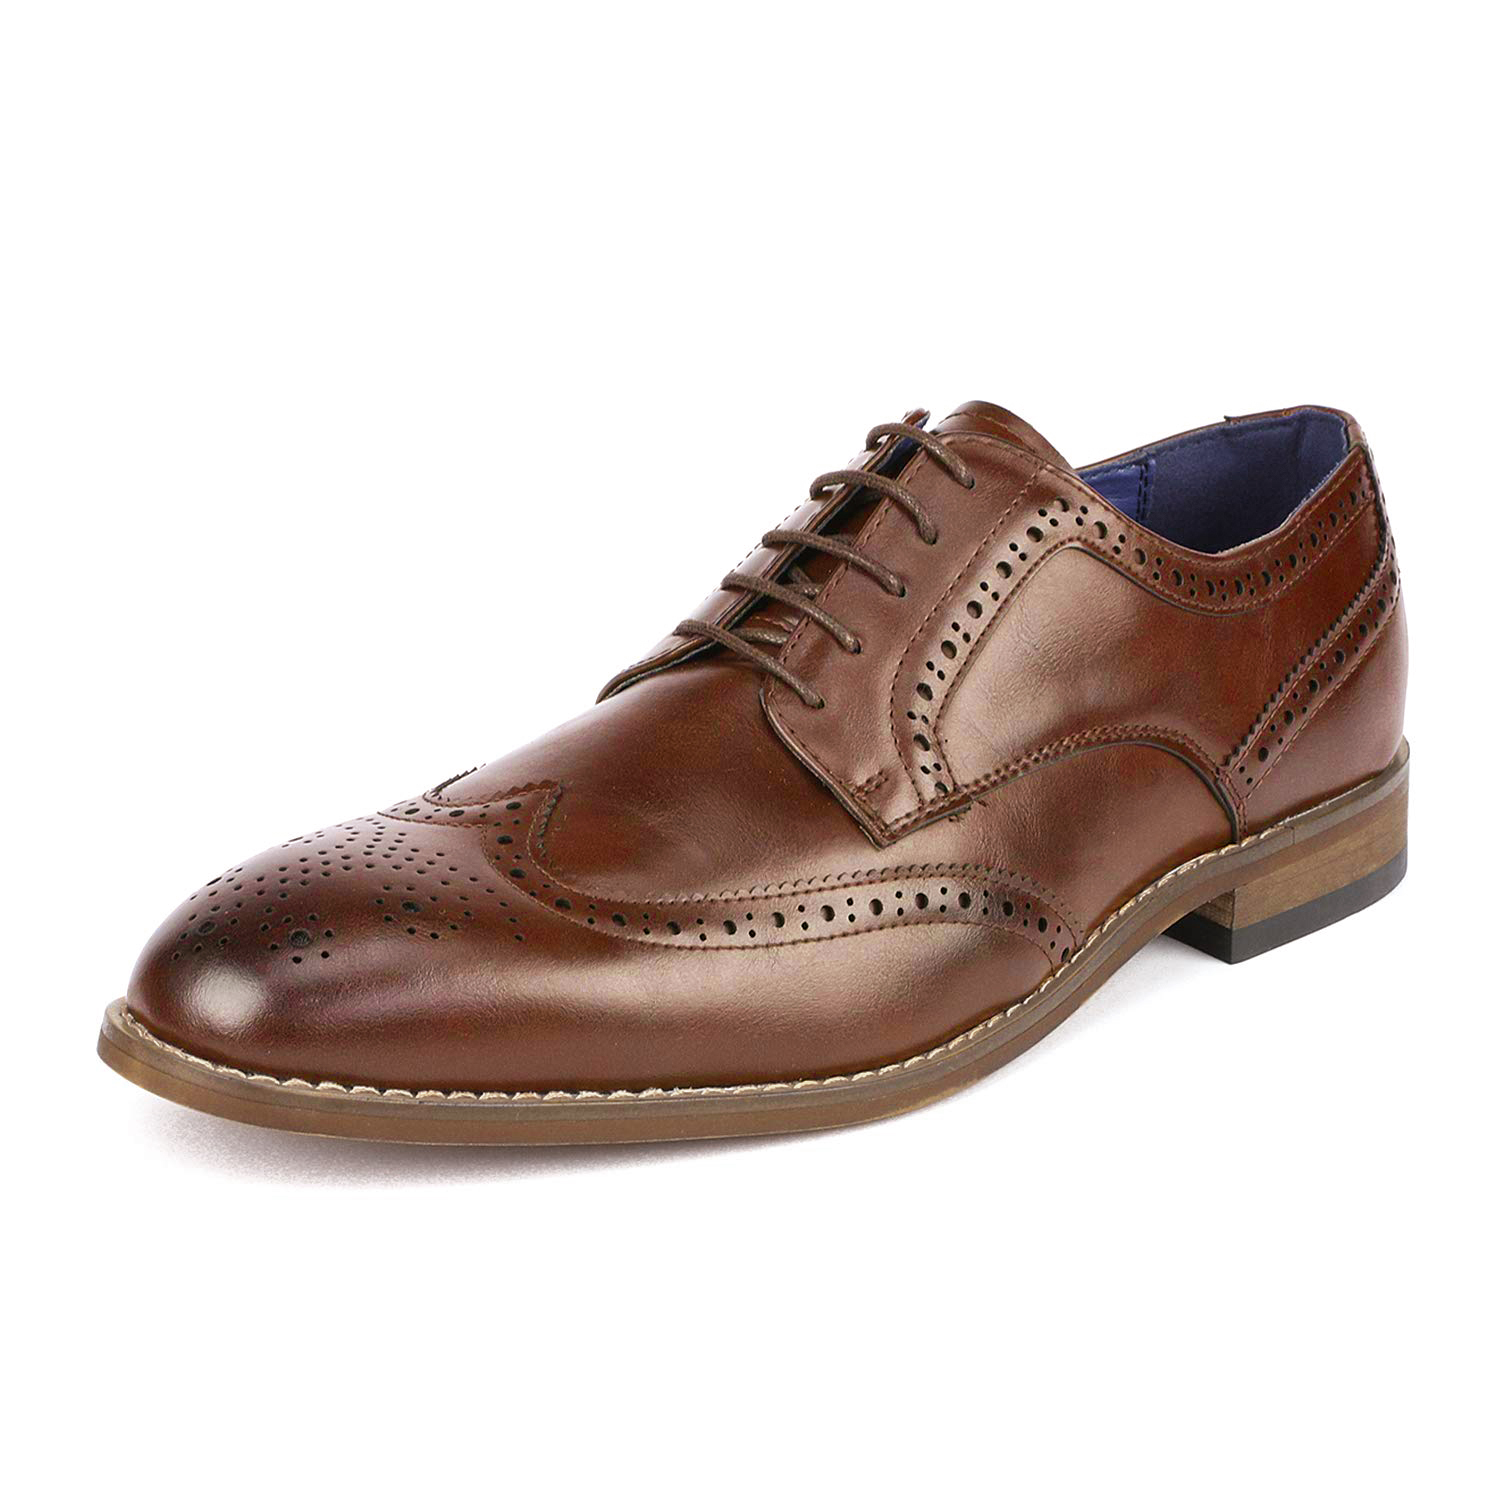 Bruno Marc Mens Brogue Oxford Shoes Lace up Wing Tip Dress Shoes Casual Shoes WILLIAM_2 BROWN Size 9 - image 1 of 5